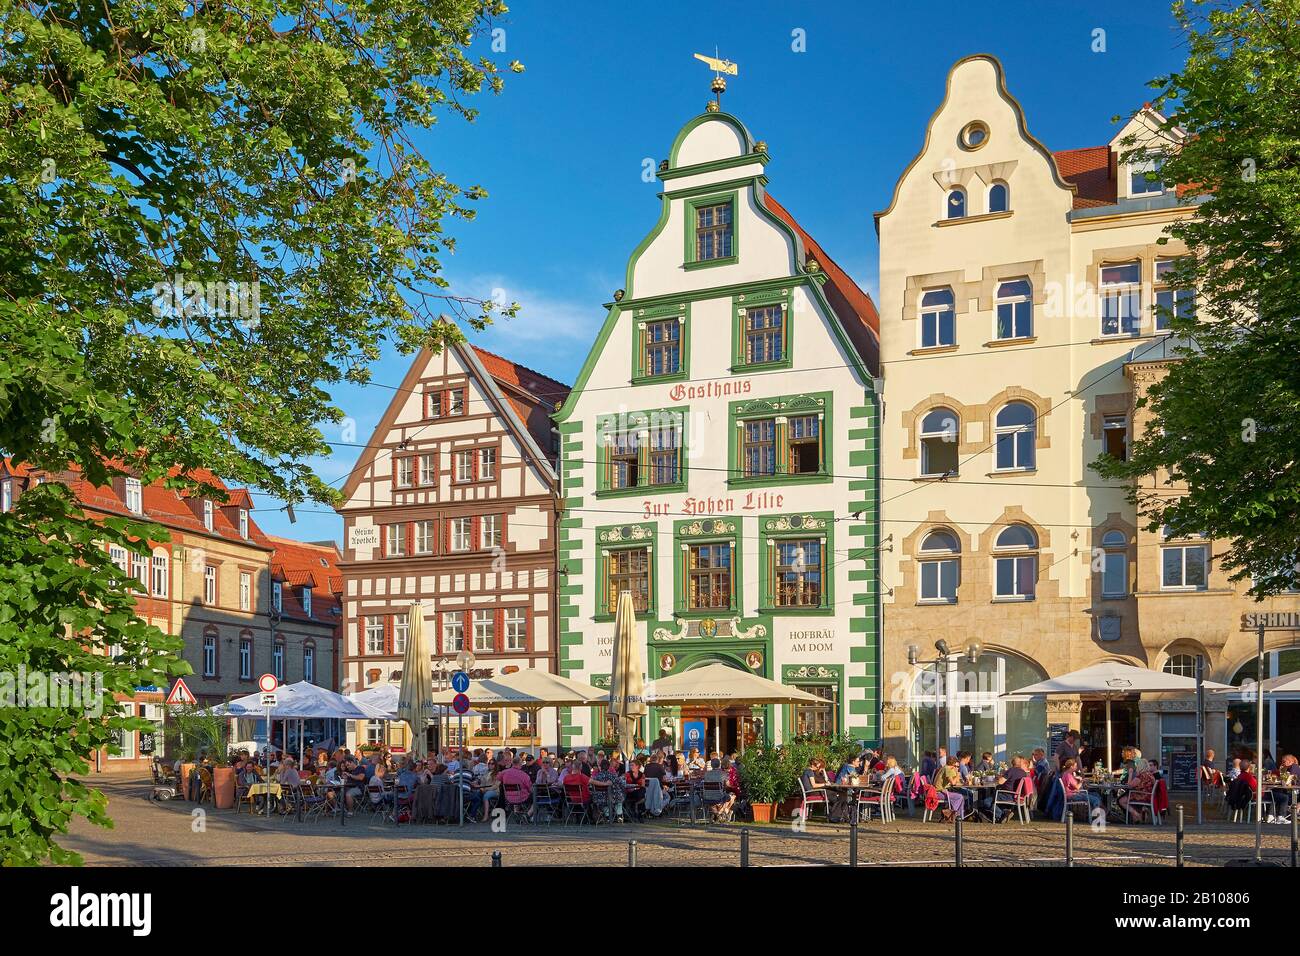 House of the Hohe Lilie at Domplatz in Erfurt, Thuringia, Germany Stock Photo